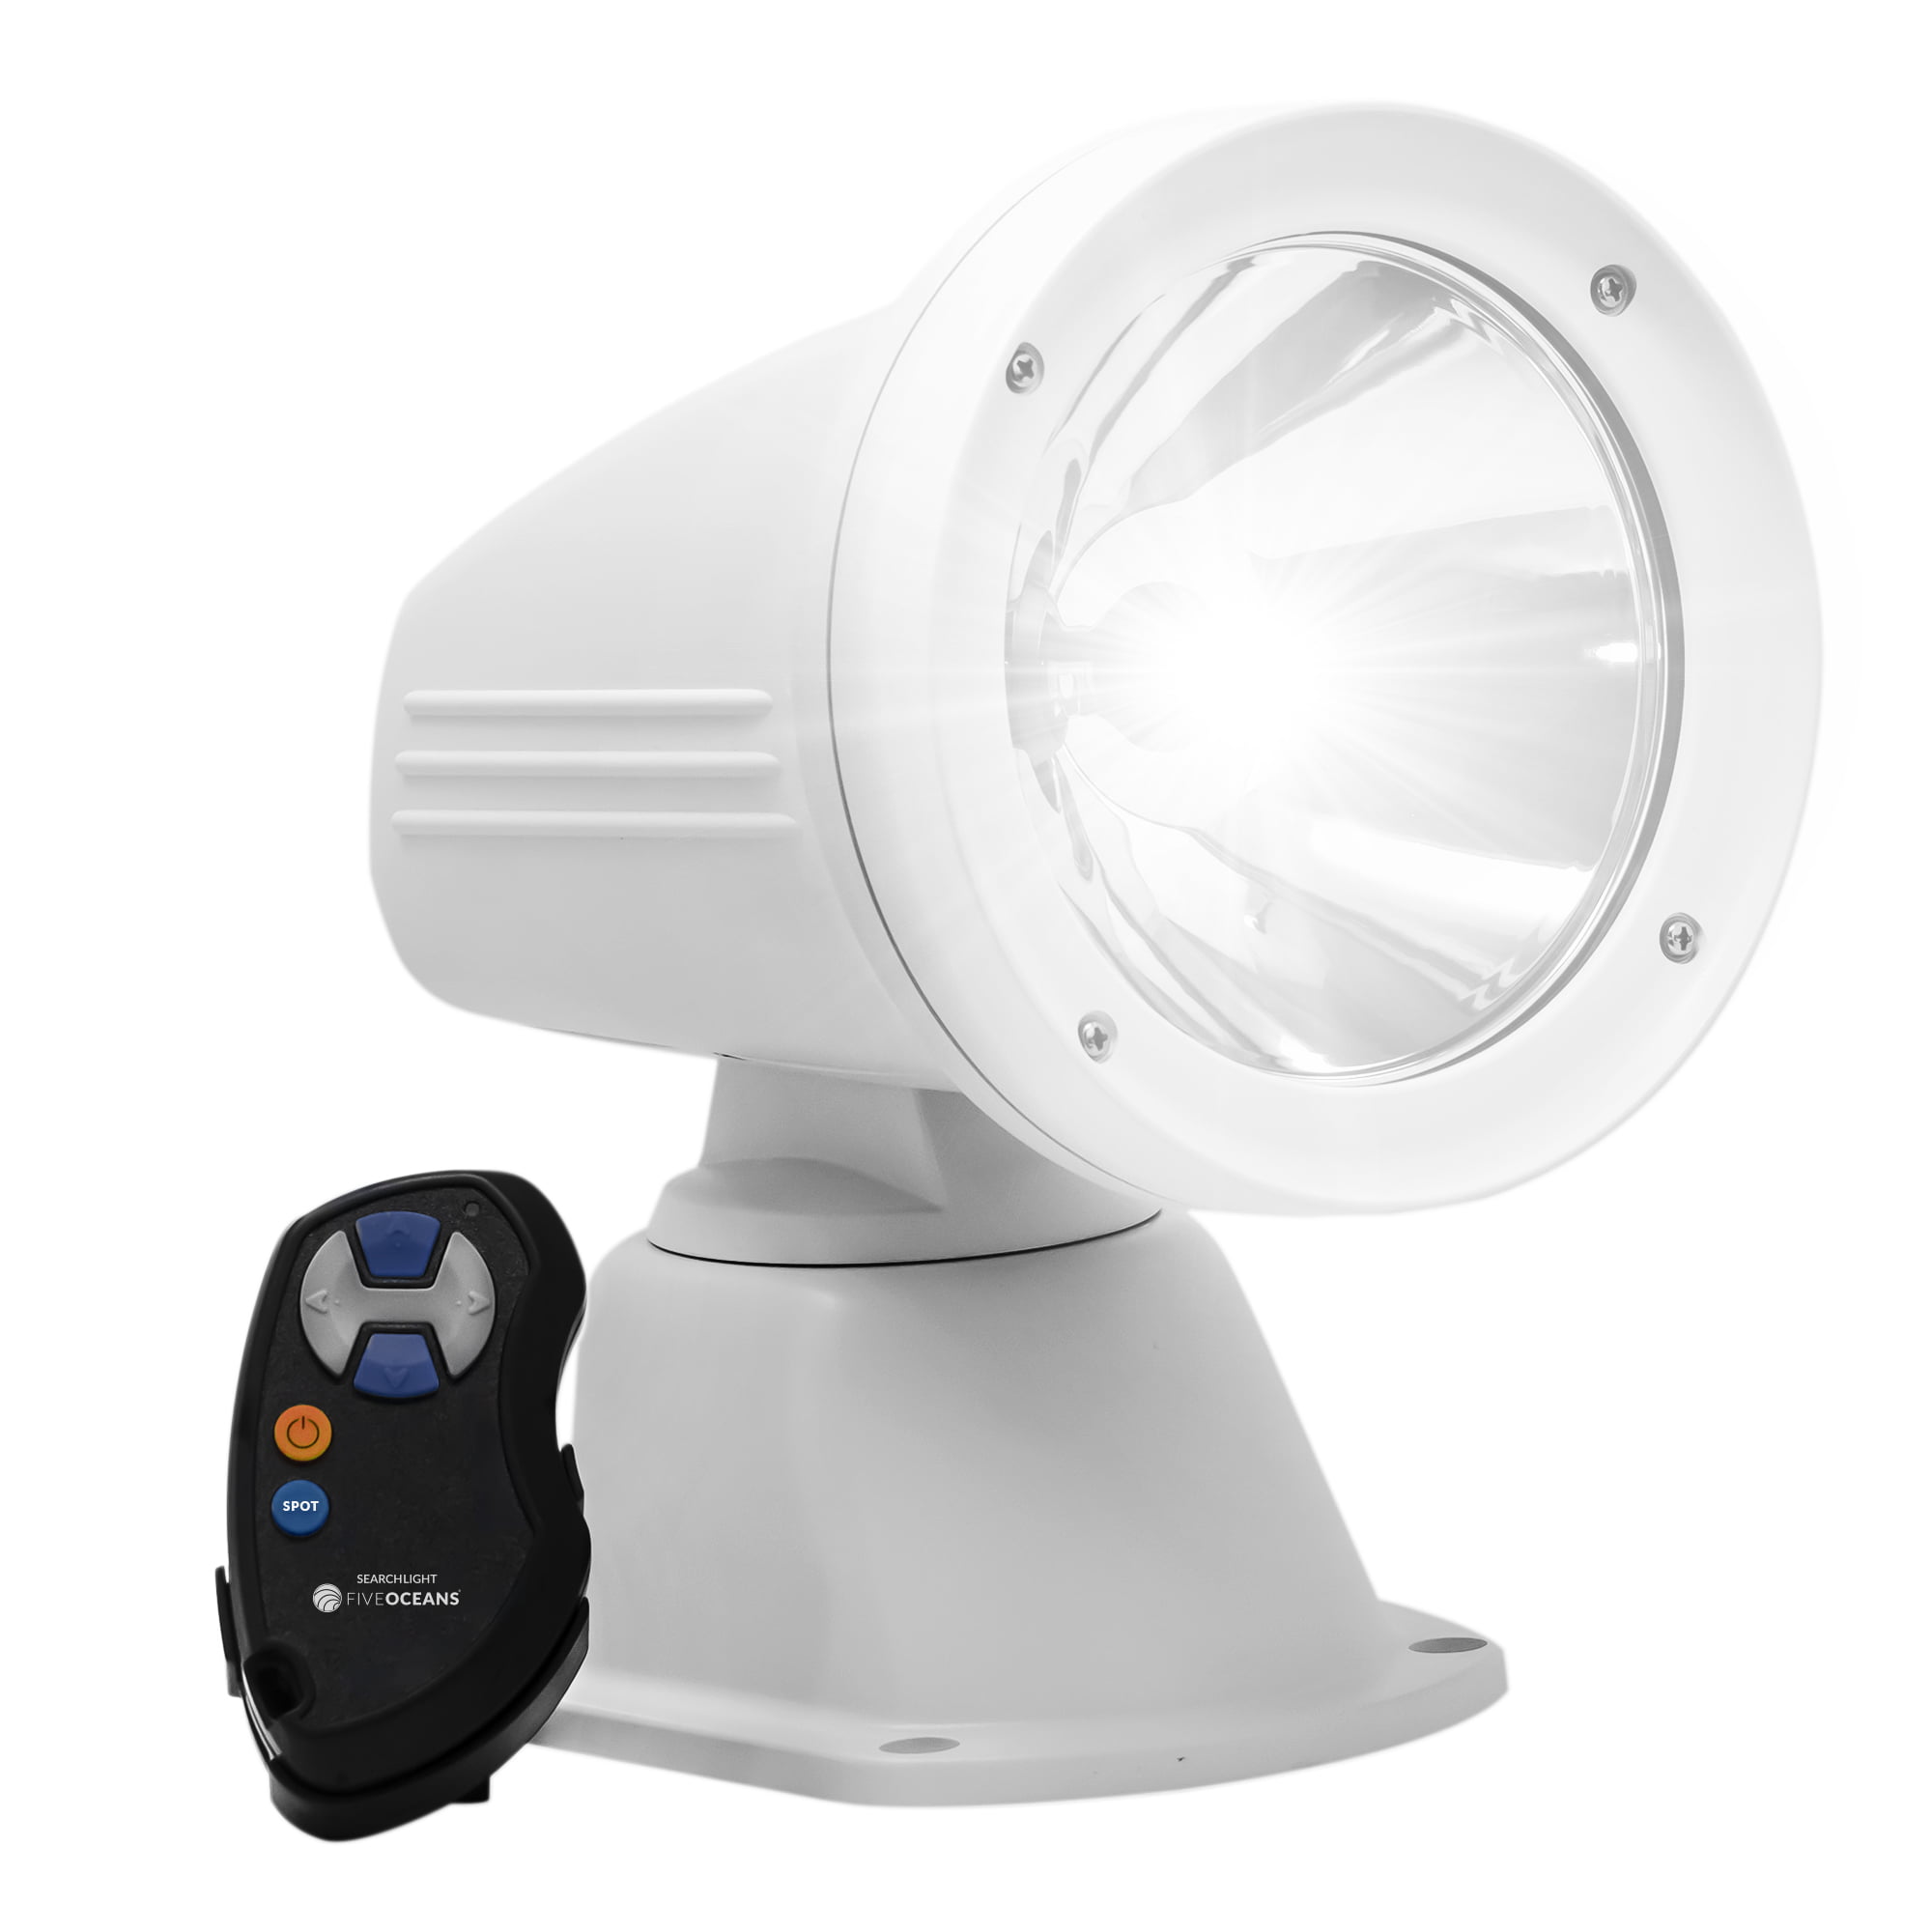 Spot/Flood Beam Horizontal/Vertical Rotation, Commercial & Recreational Boats Five Oceans LED Wireless Searchlight Trucks FO-4519 RV Trailer 6000 Lumens Remote Control High Power